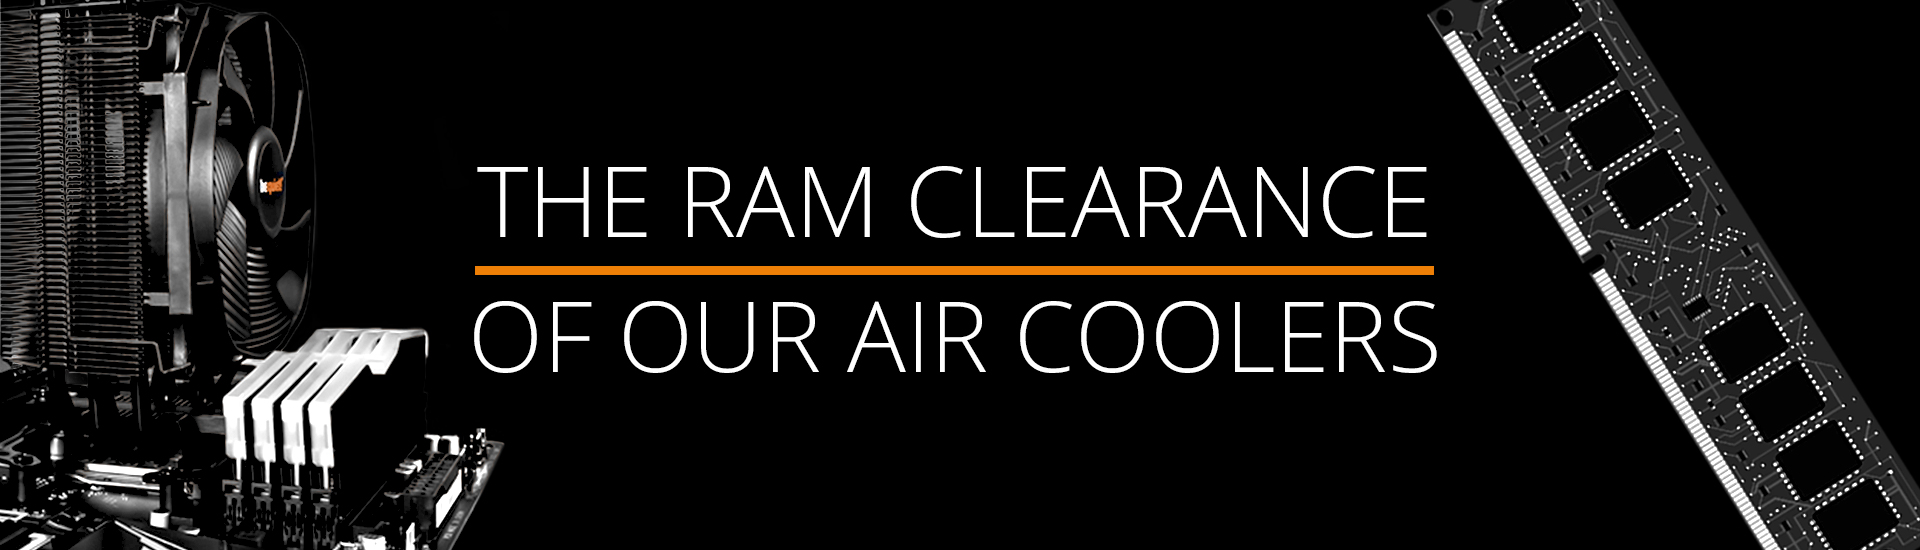 The clearance of our air coolers